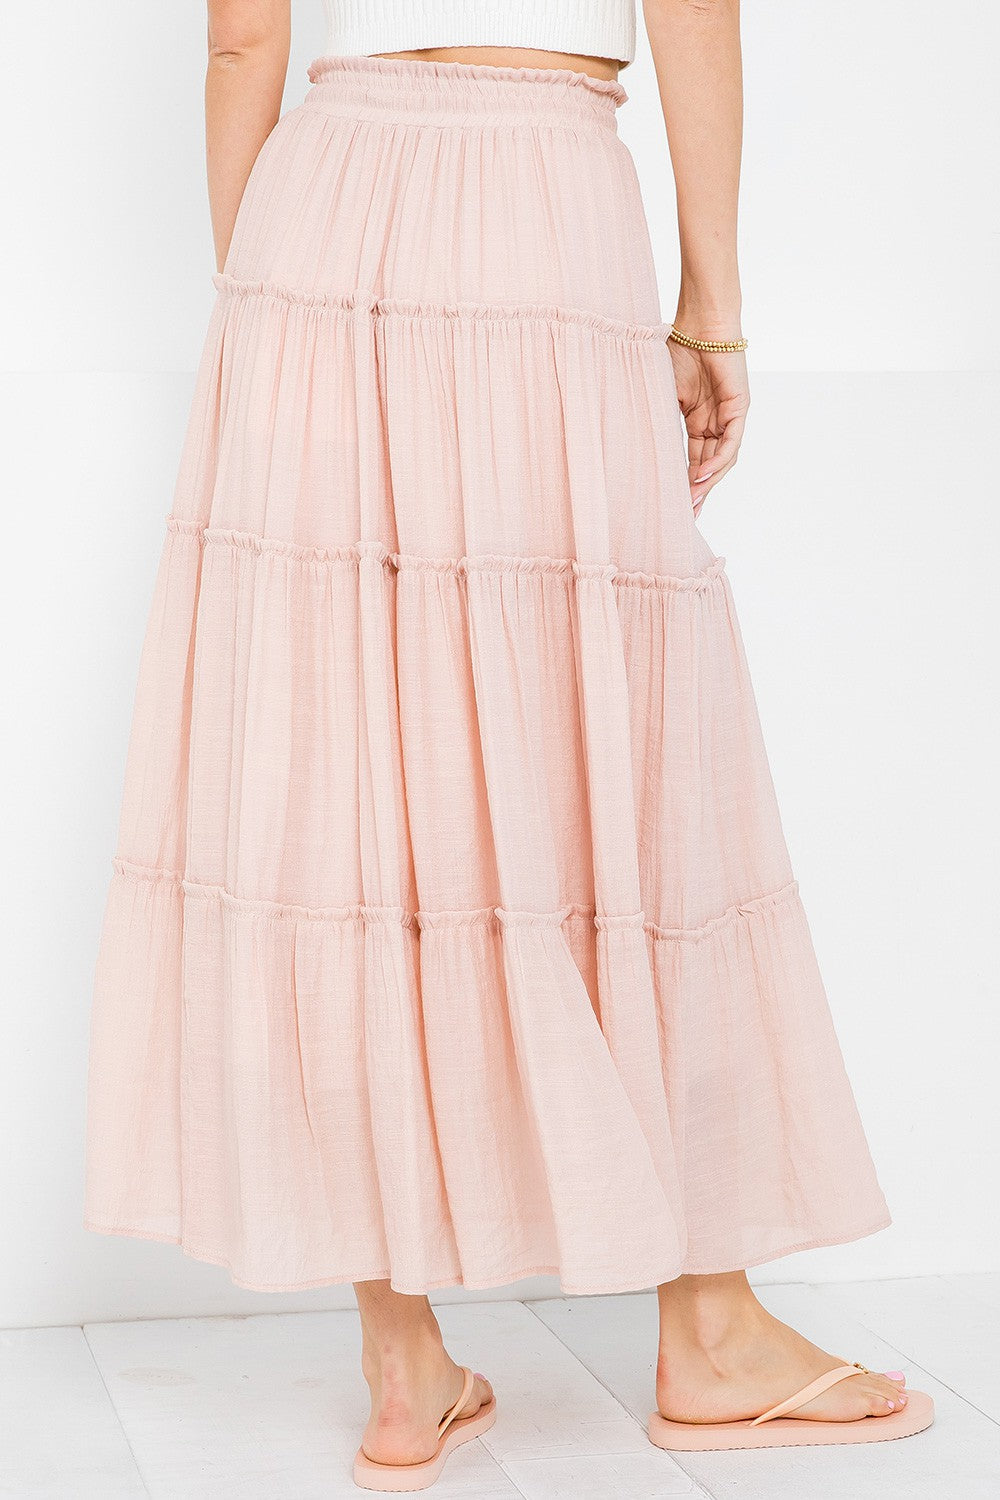 TIERED DRAWSTRING MAXI SKIRT in NUDE BLUSH